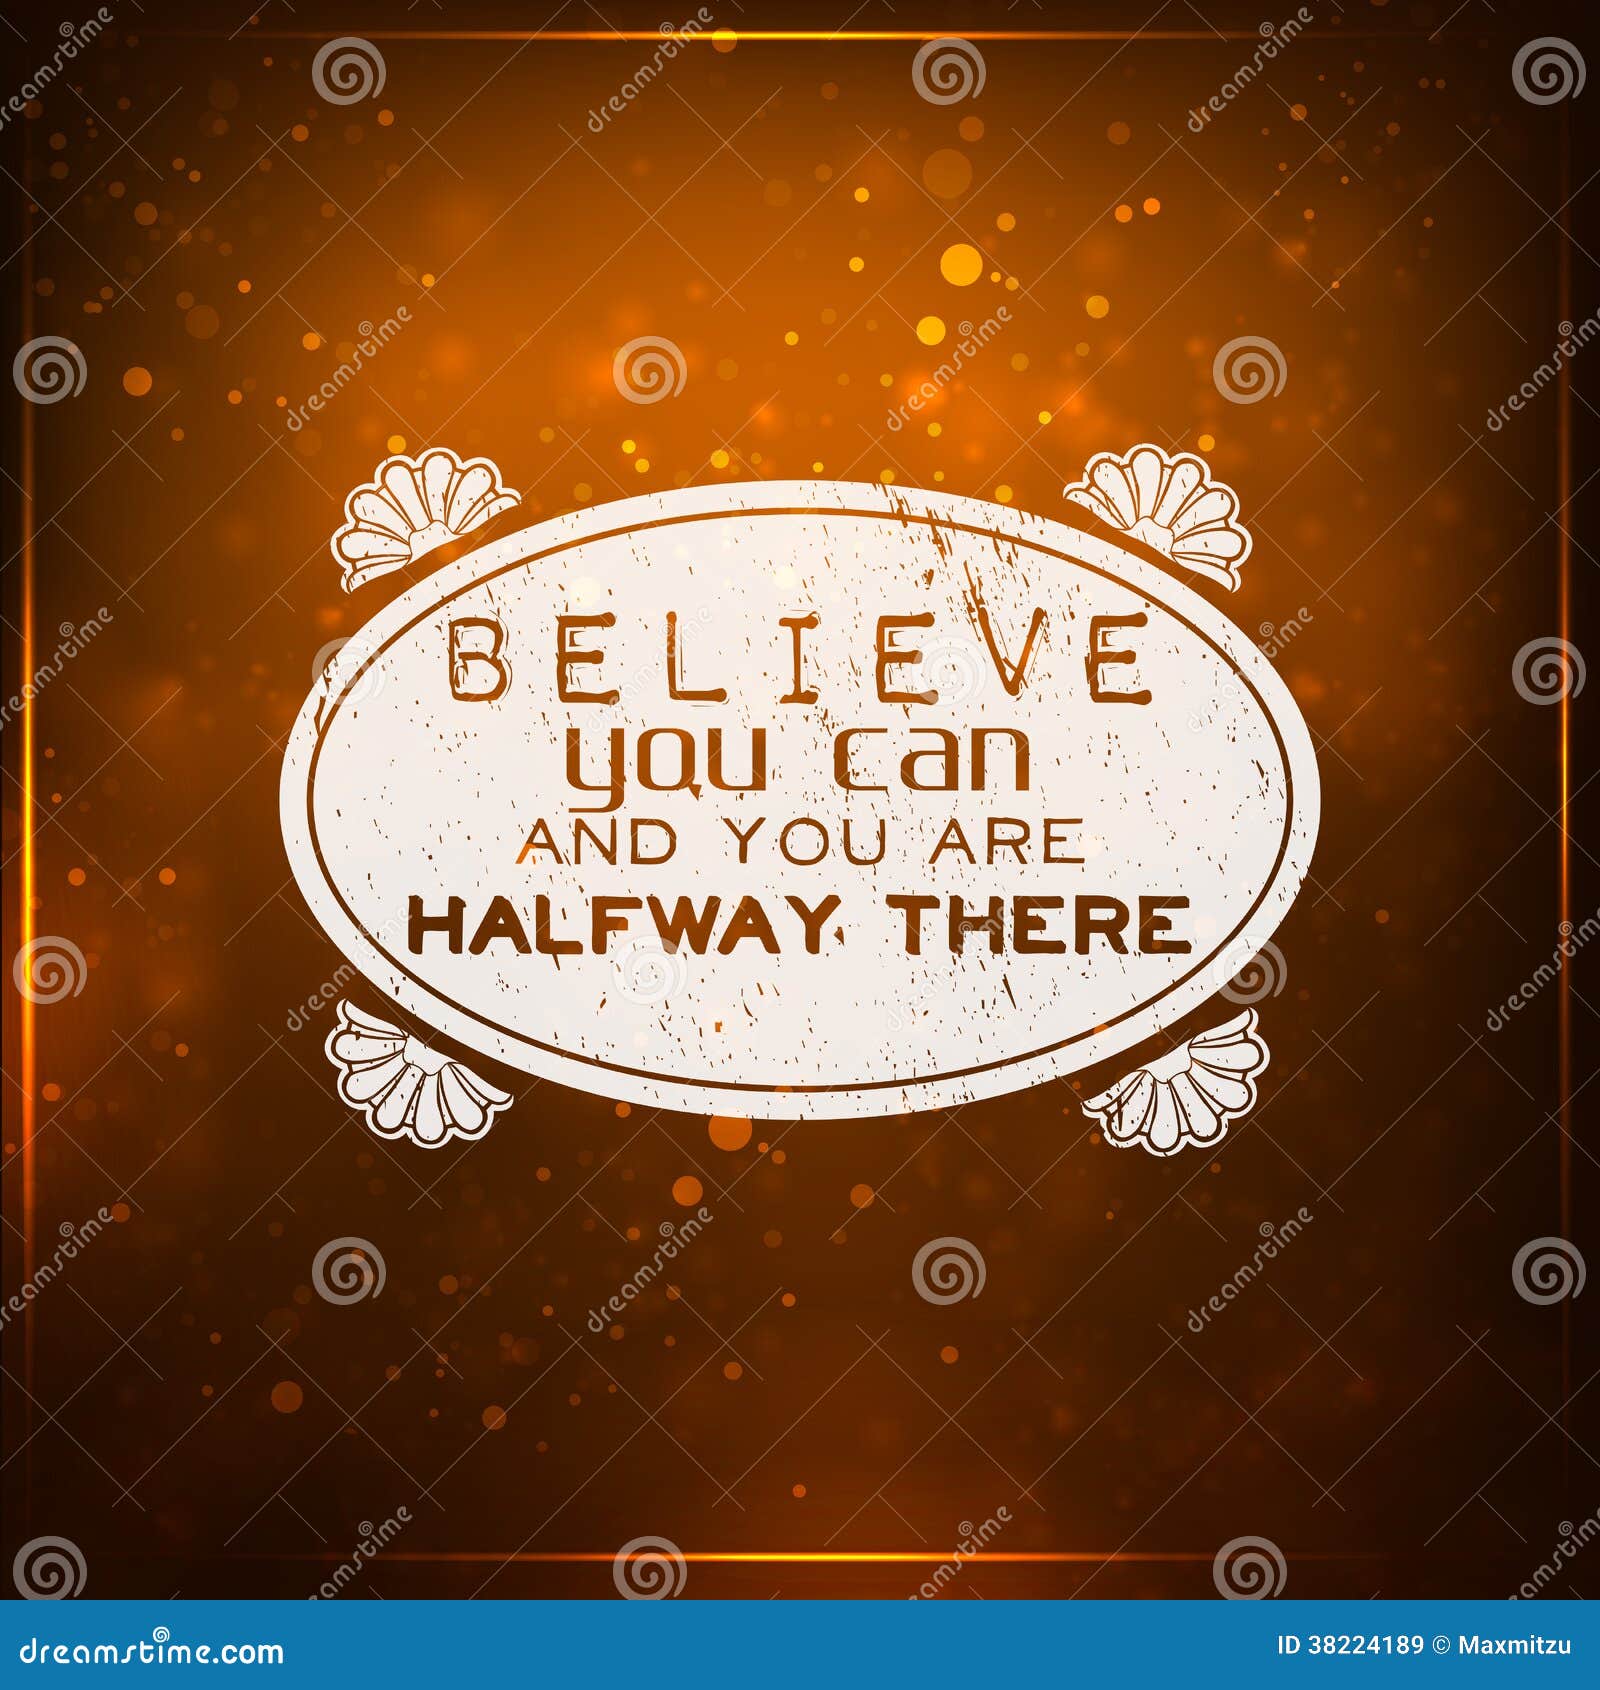 believe you can and you are halfway there